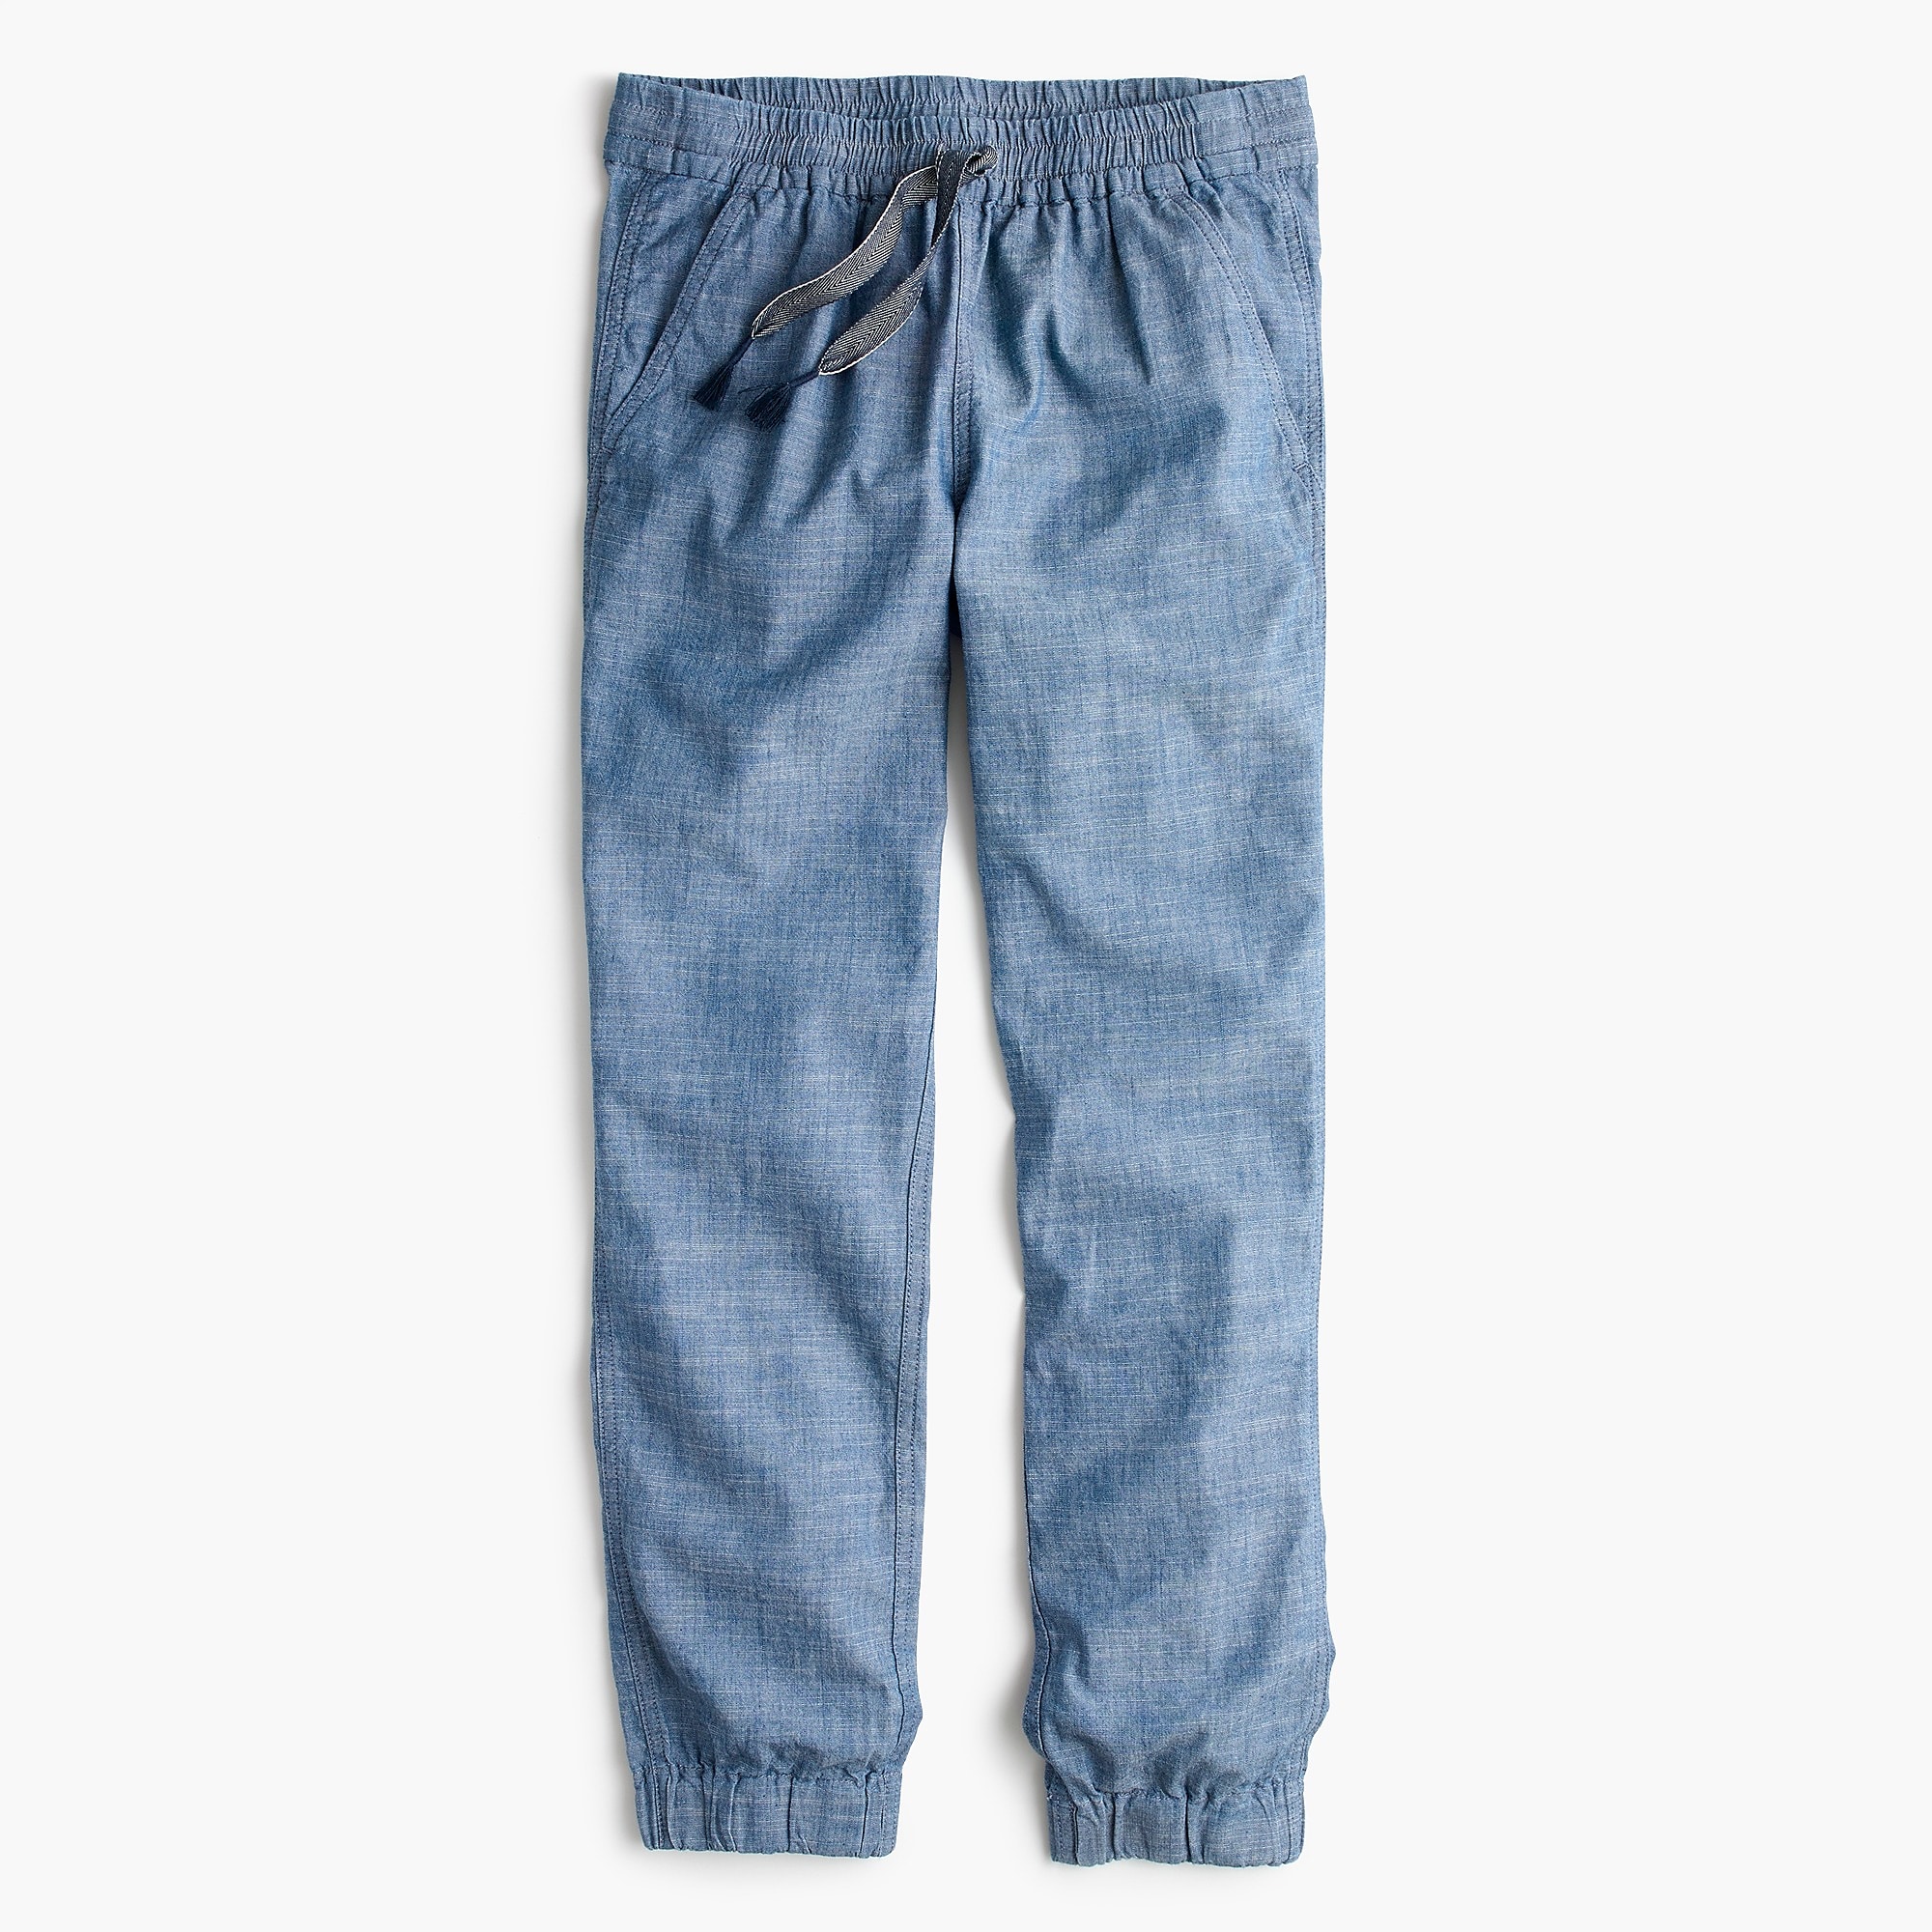 Tall new seaside pant in chambray : Women pants | J.Crew